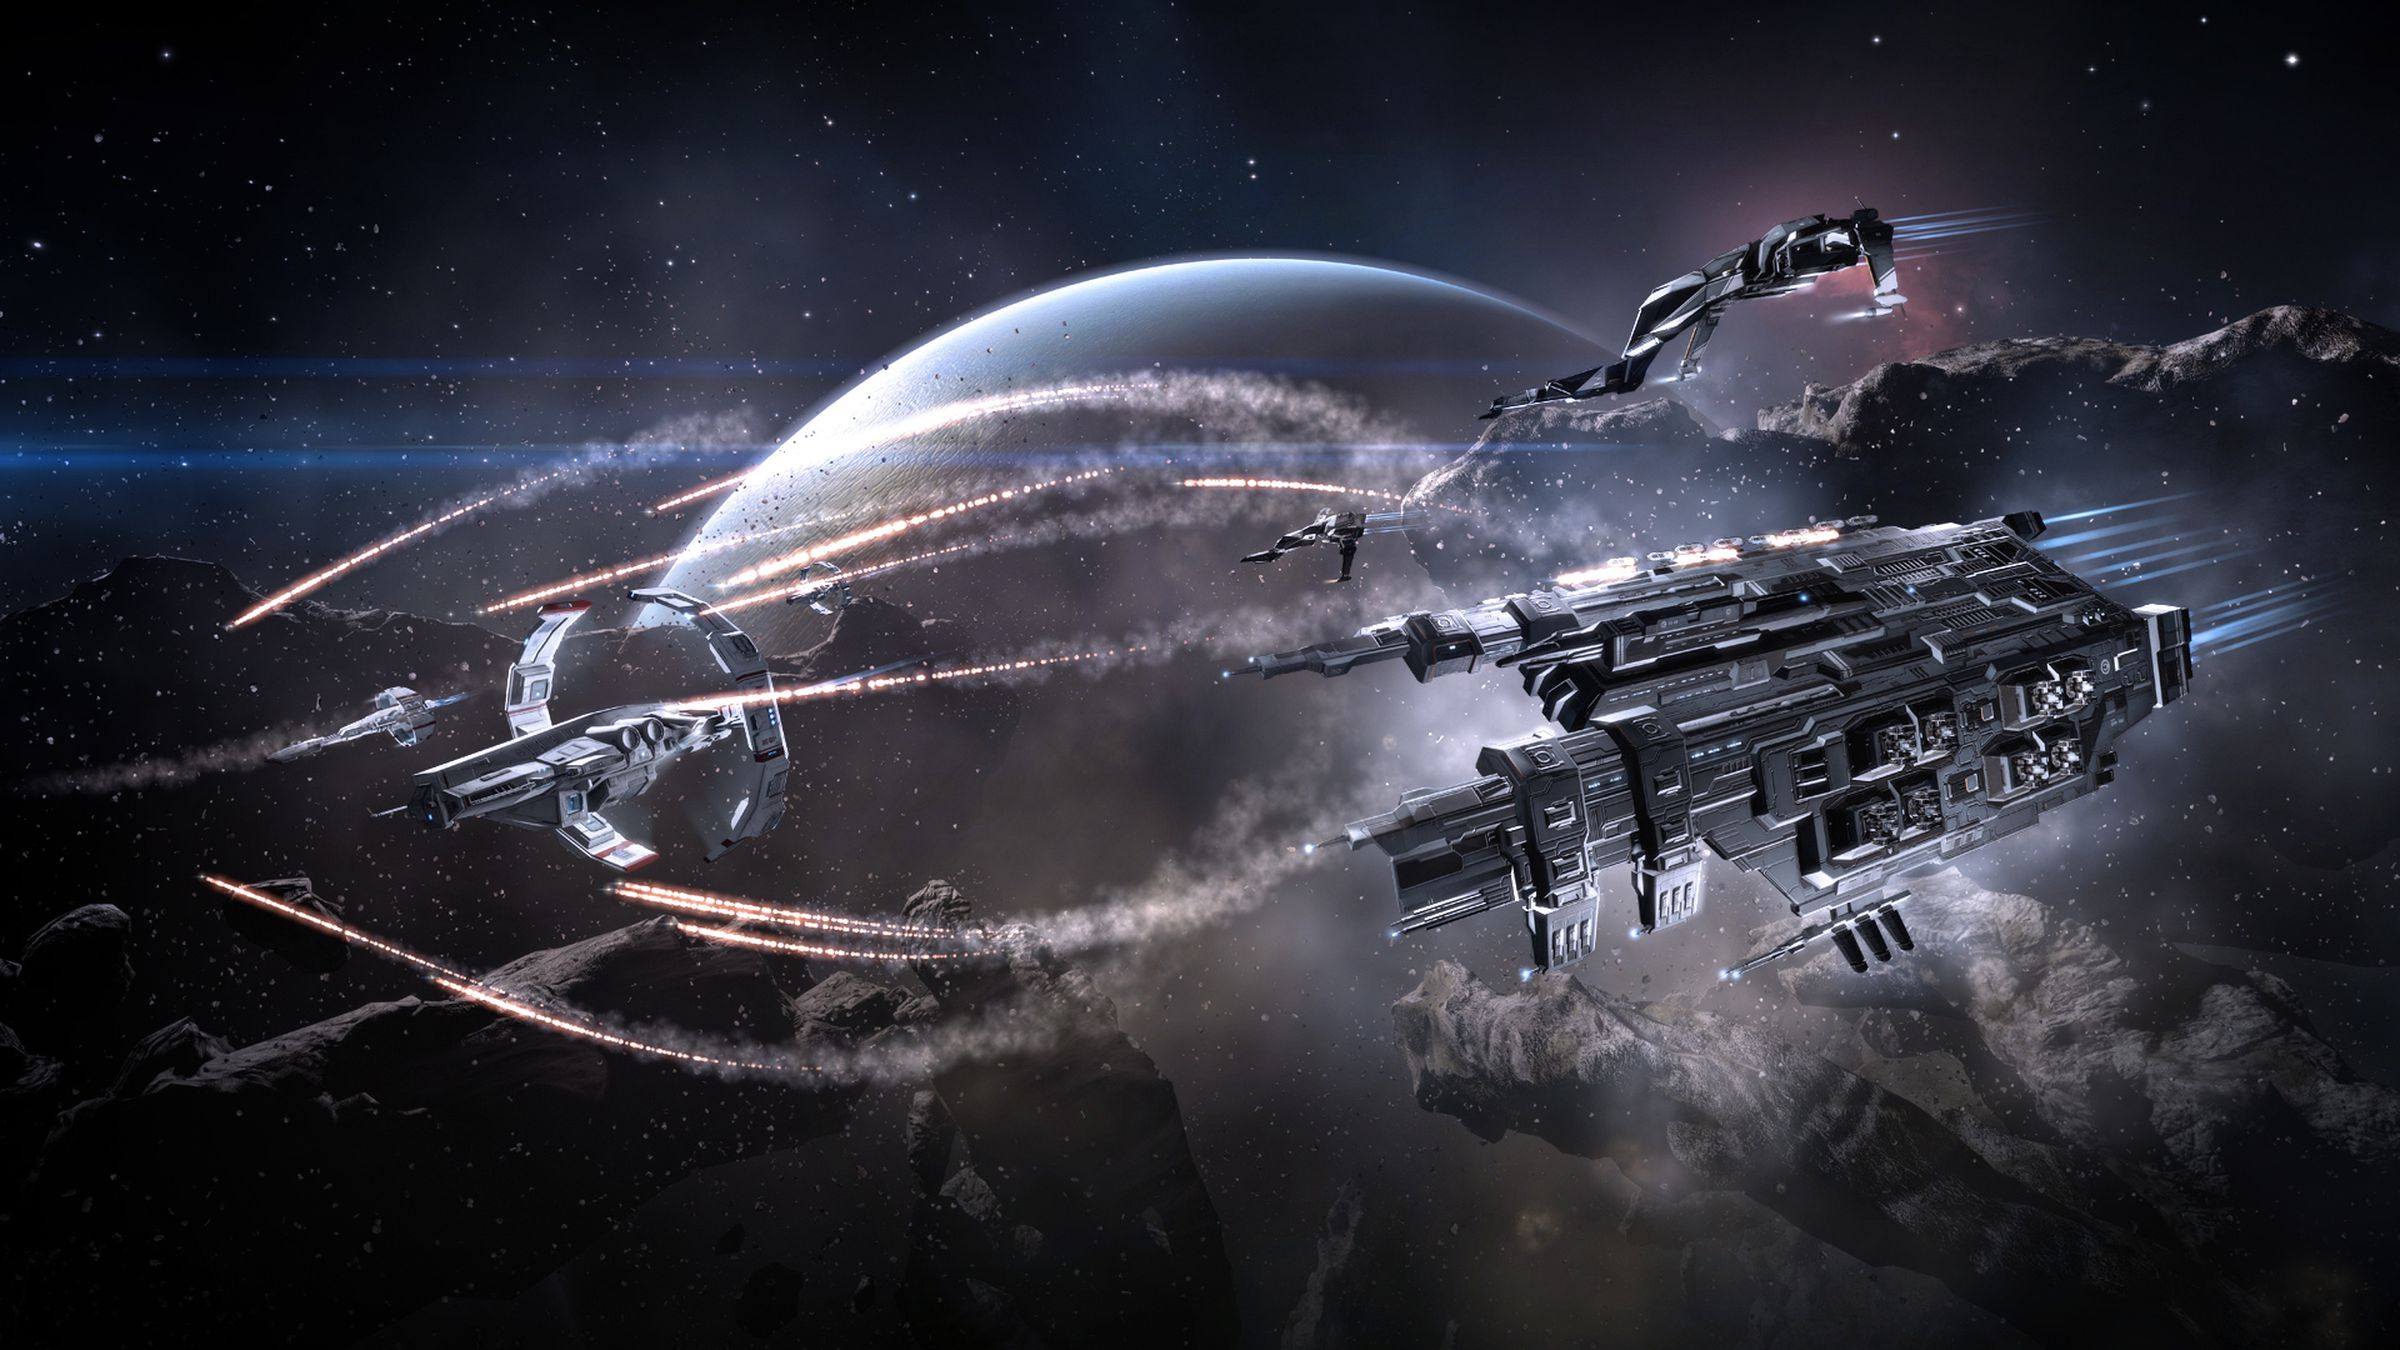 A scene from the game EVE Online.